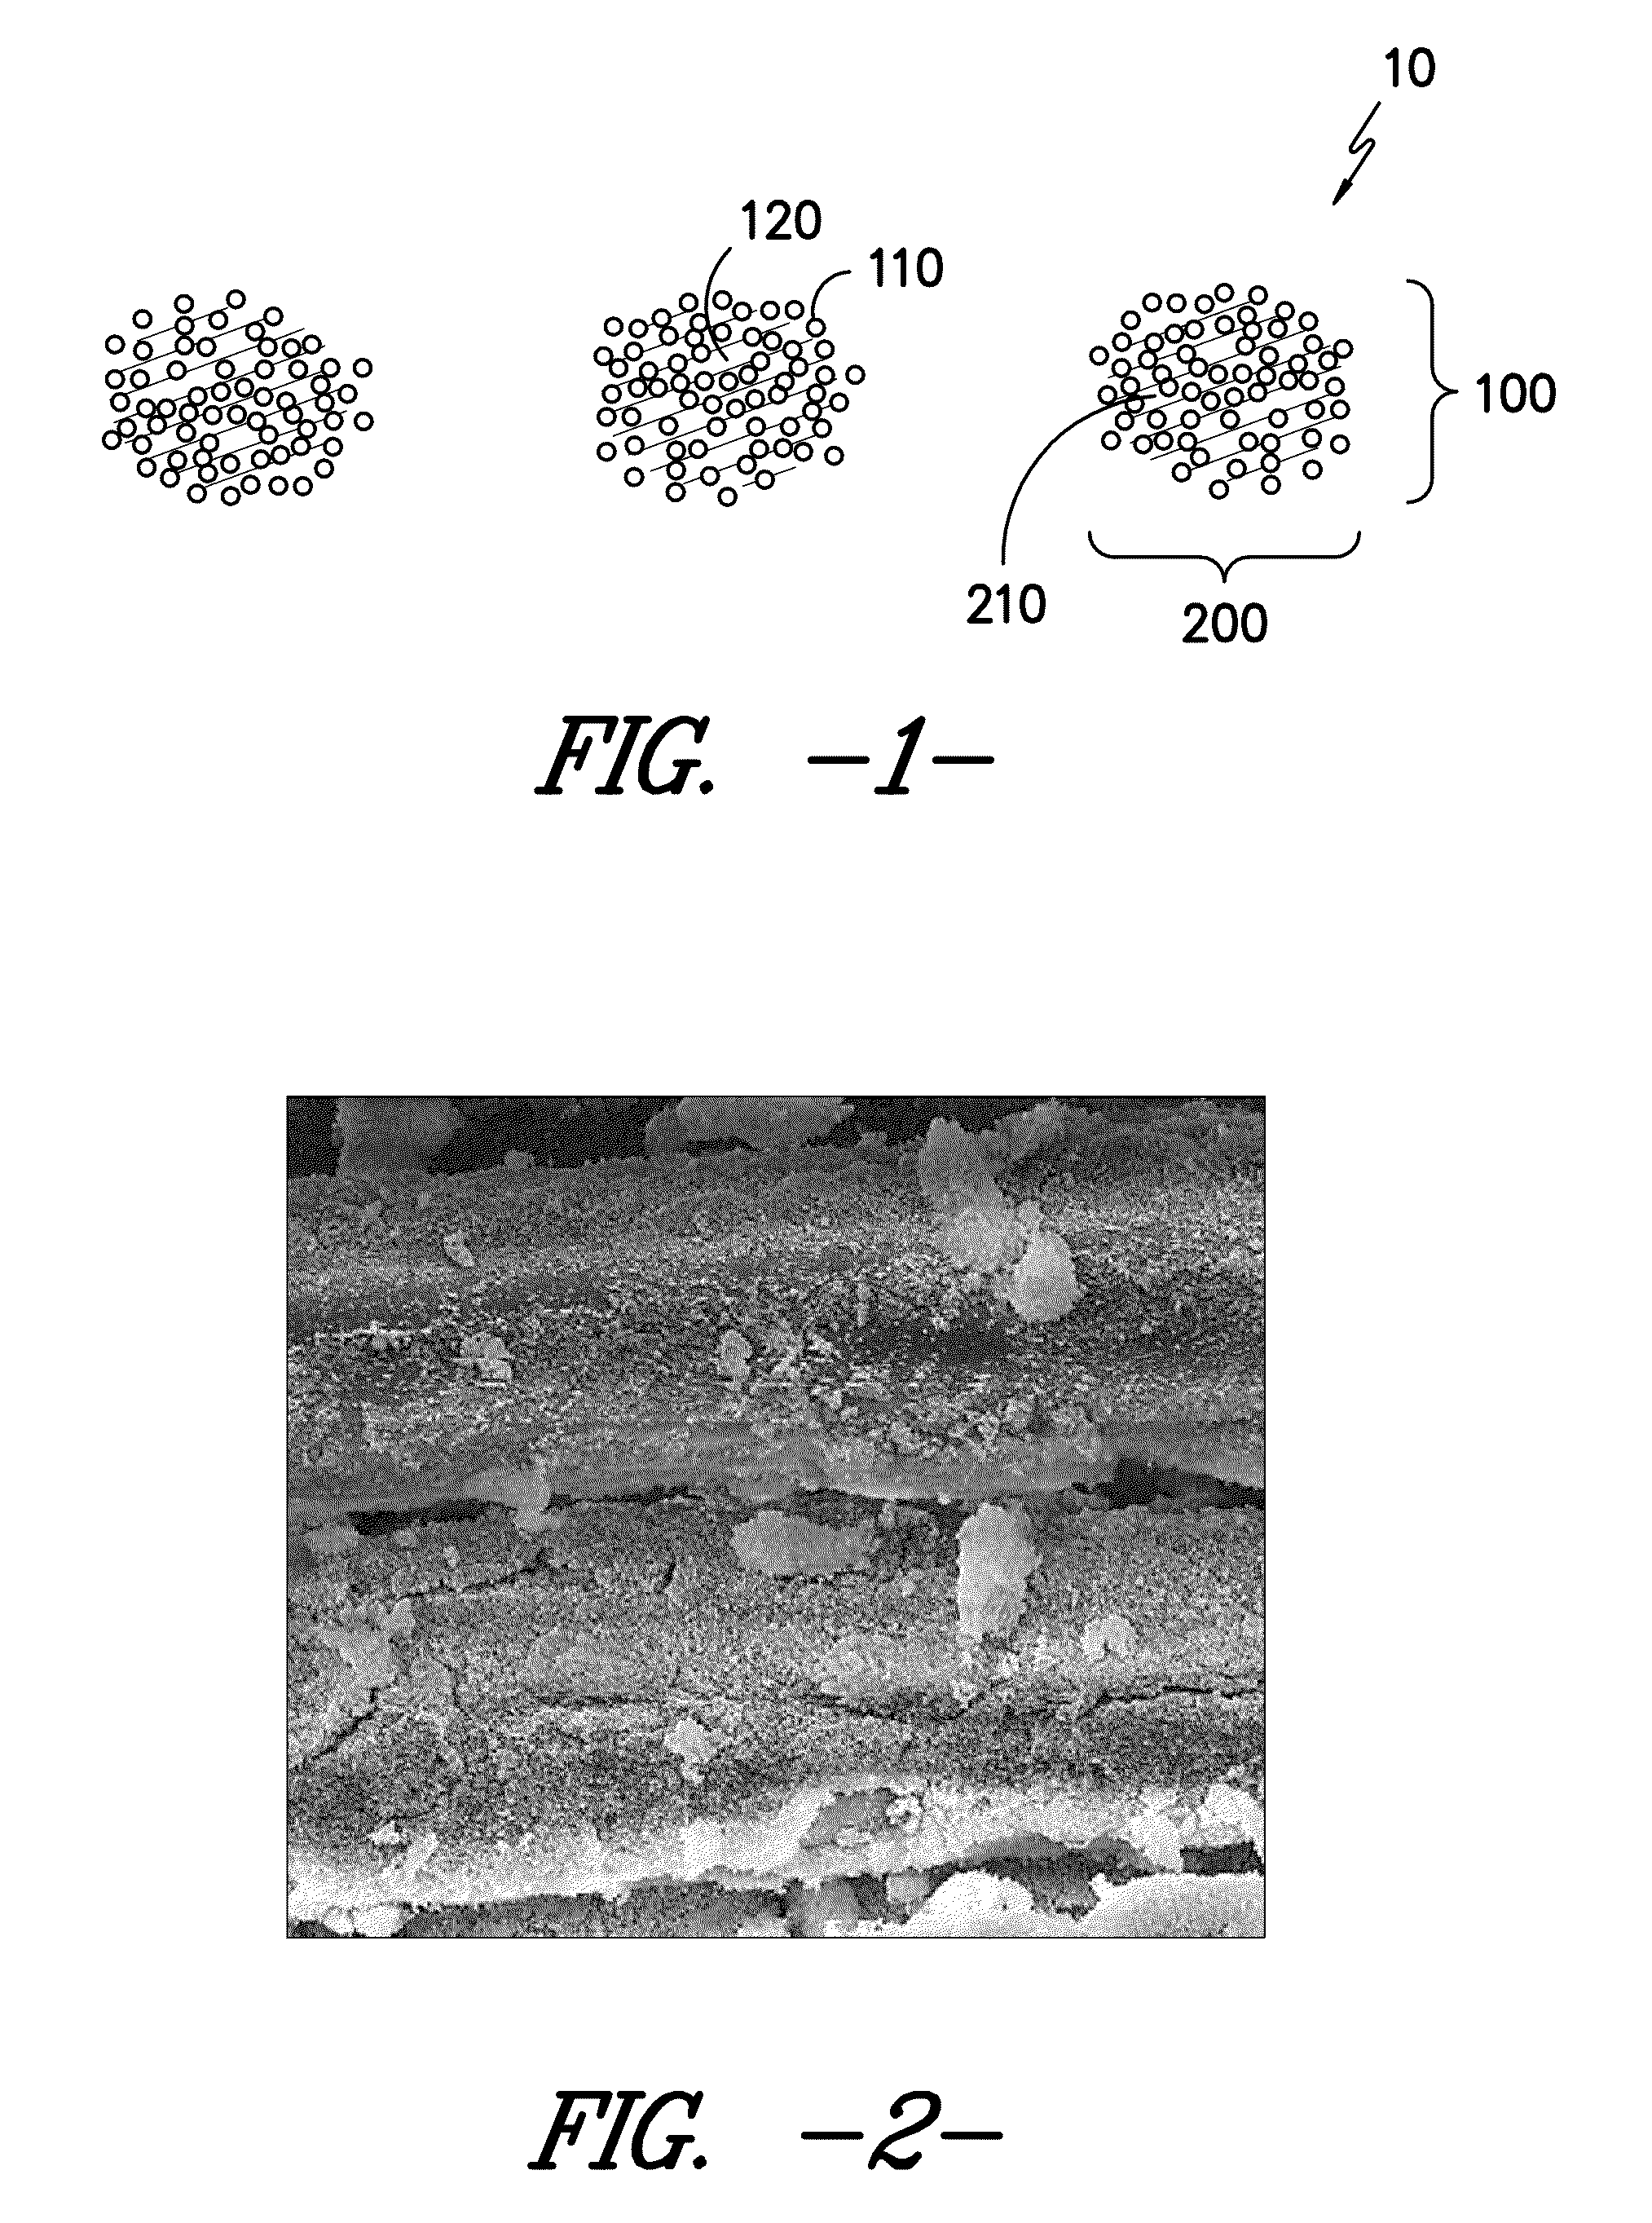 Process for forming an agglomerated particle cloud network coated fiber bundle